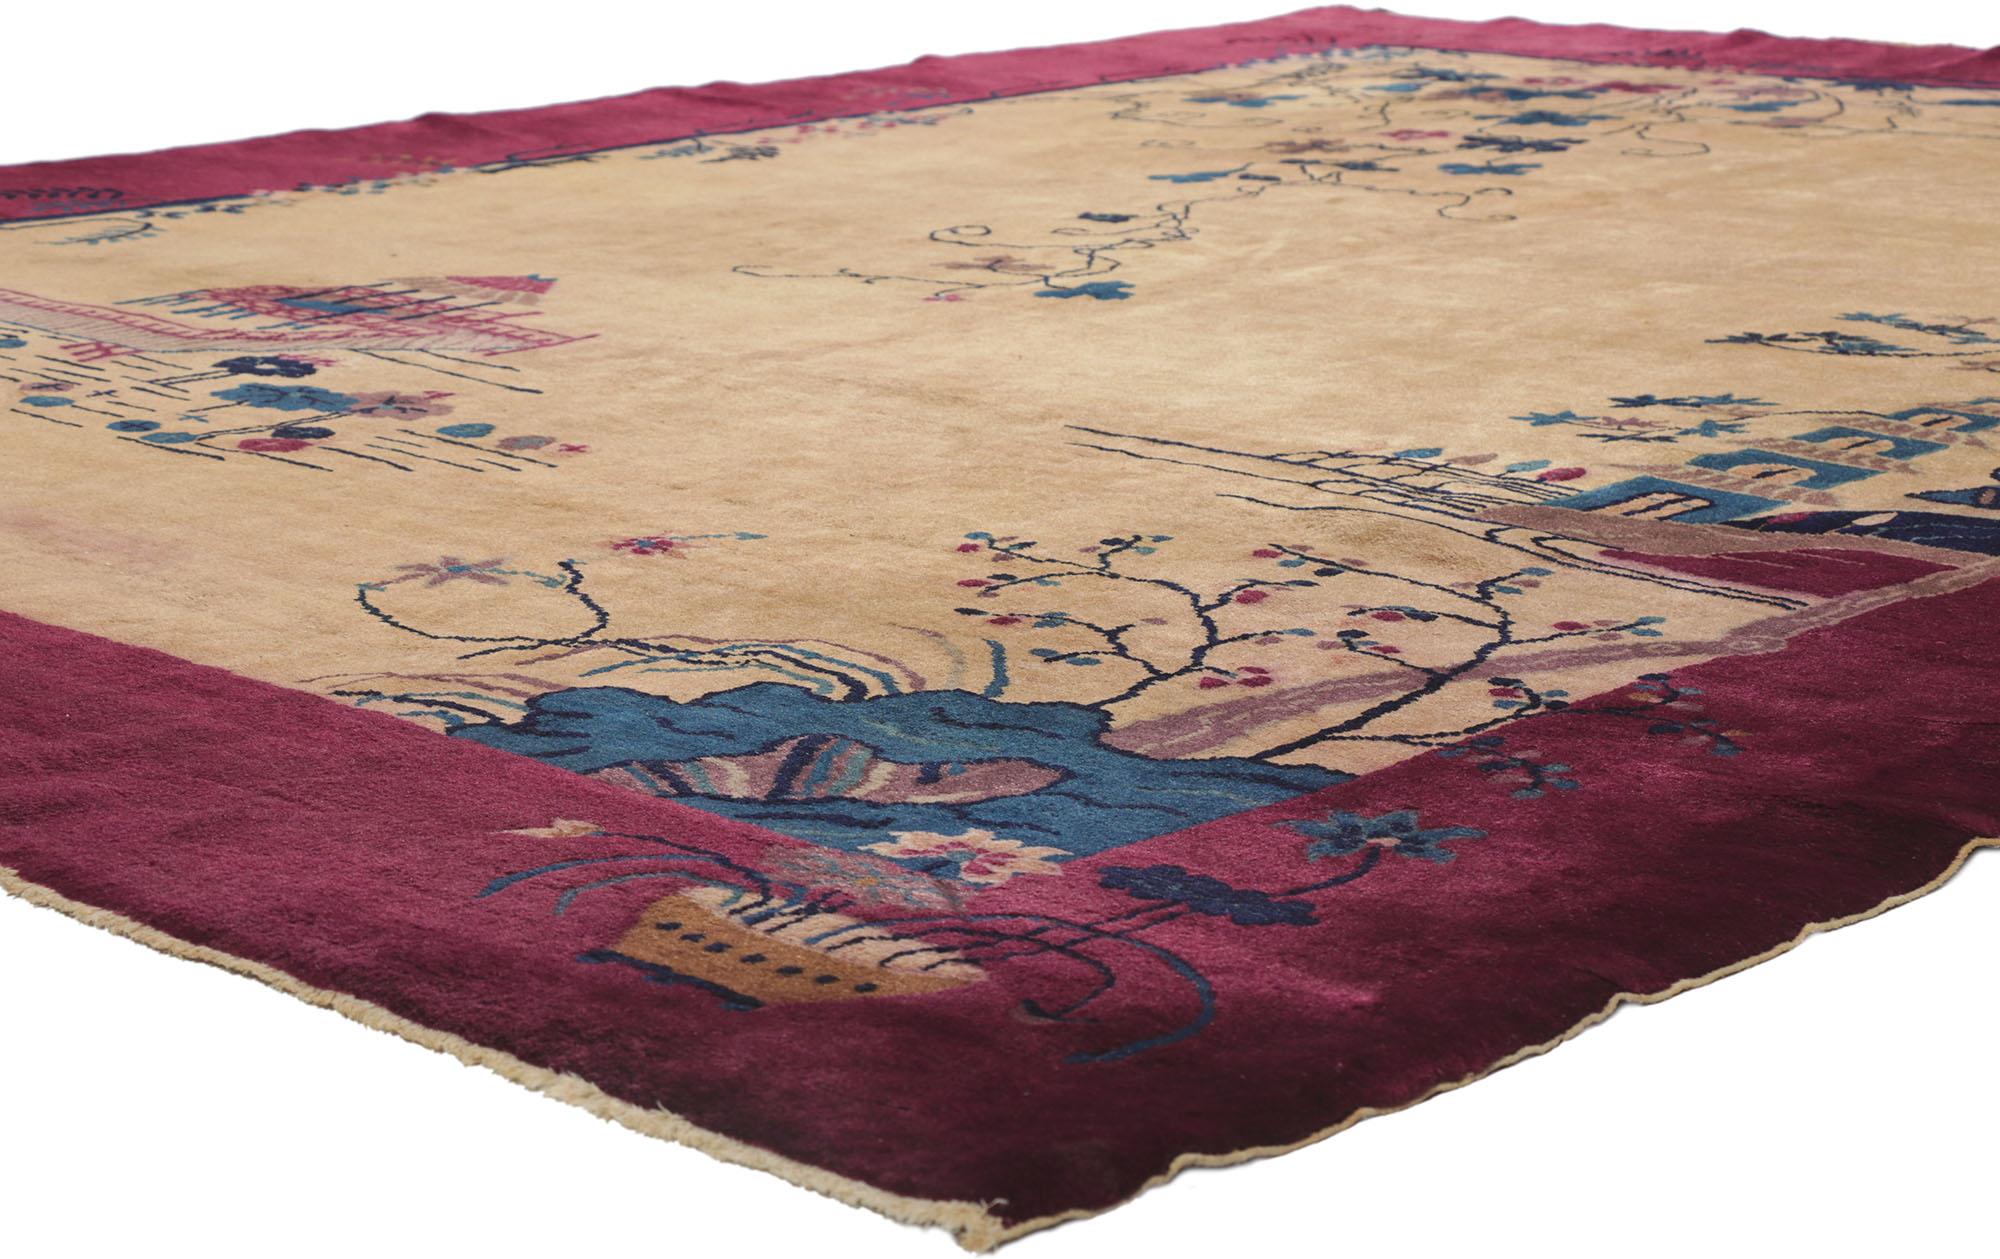 78175 Antique Chinese Art Deco Pictorial rug with Gazebo & Pagoda Scene 09'01 x 11'02. This hand knotted wool antique Chinese Art Deco rug features a color-blocked field features two wonderful landscape scenes composed of a pagoda, gazebo, intricate